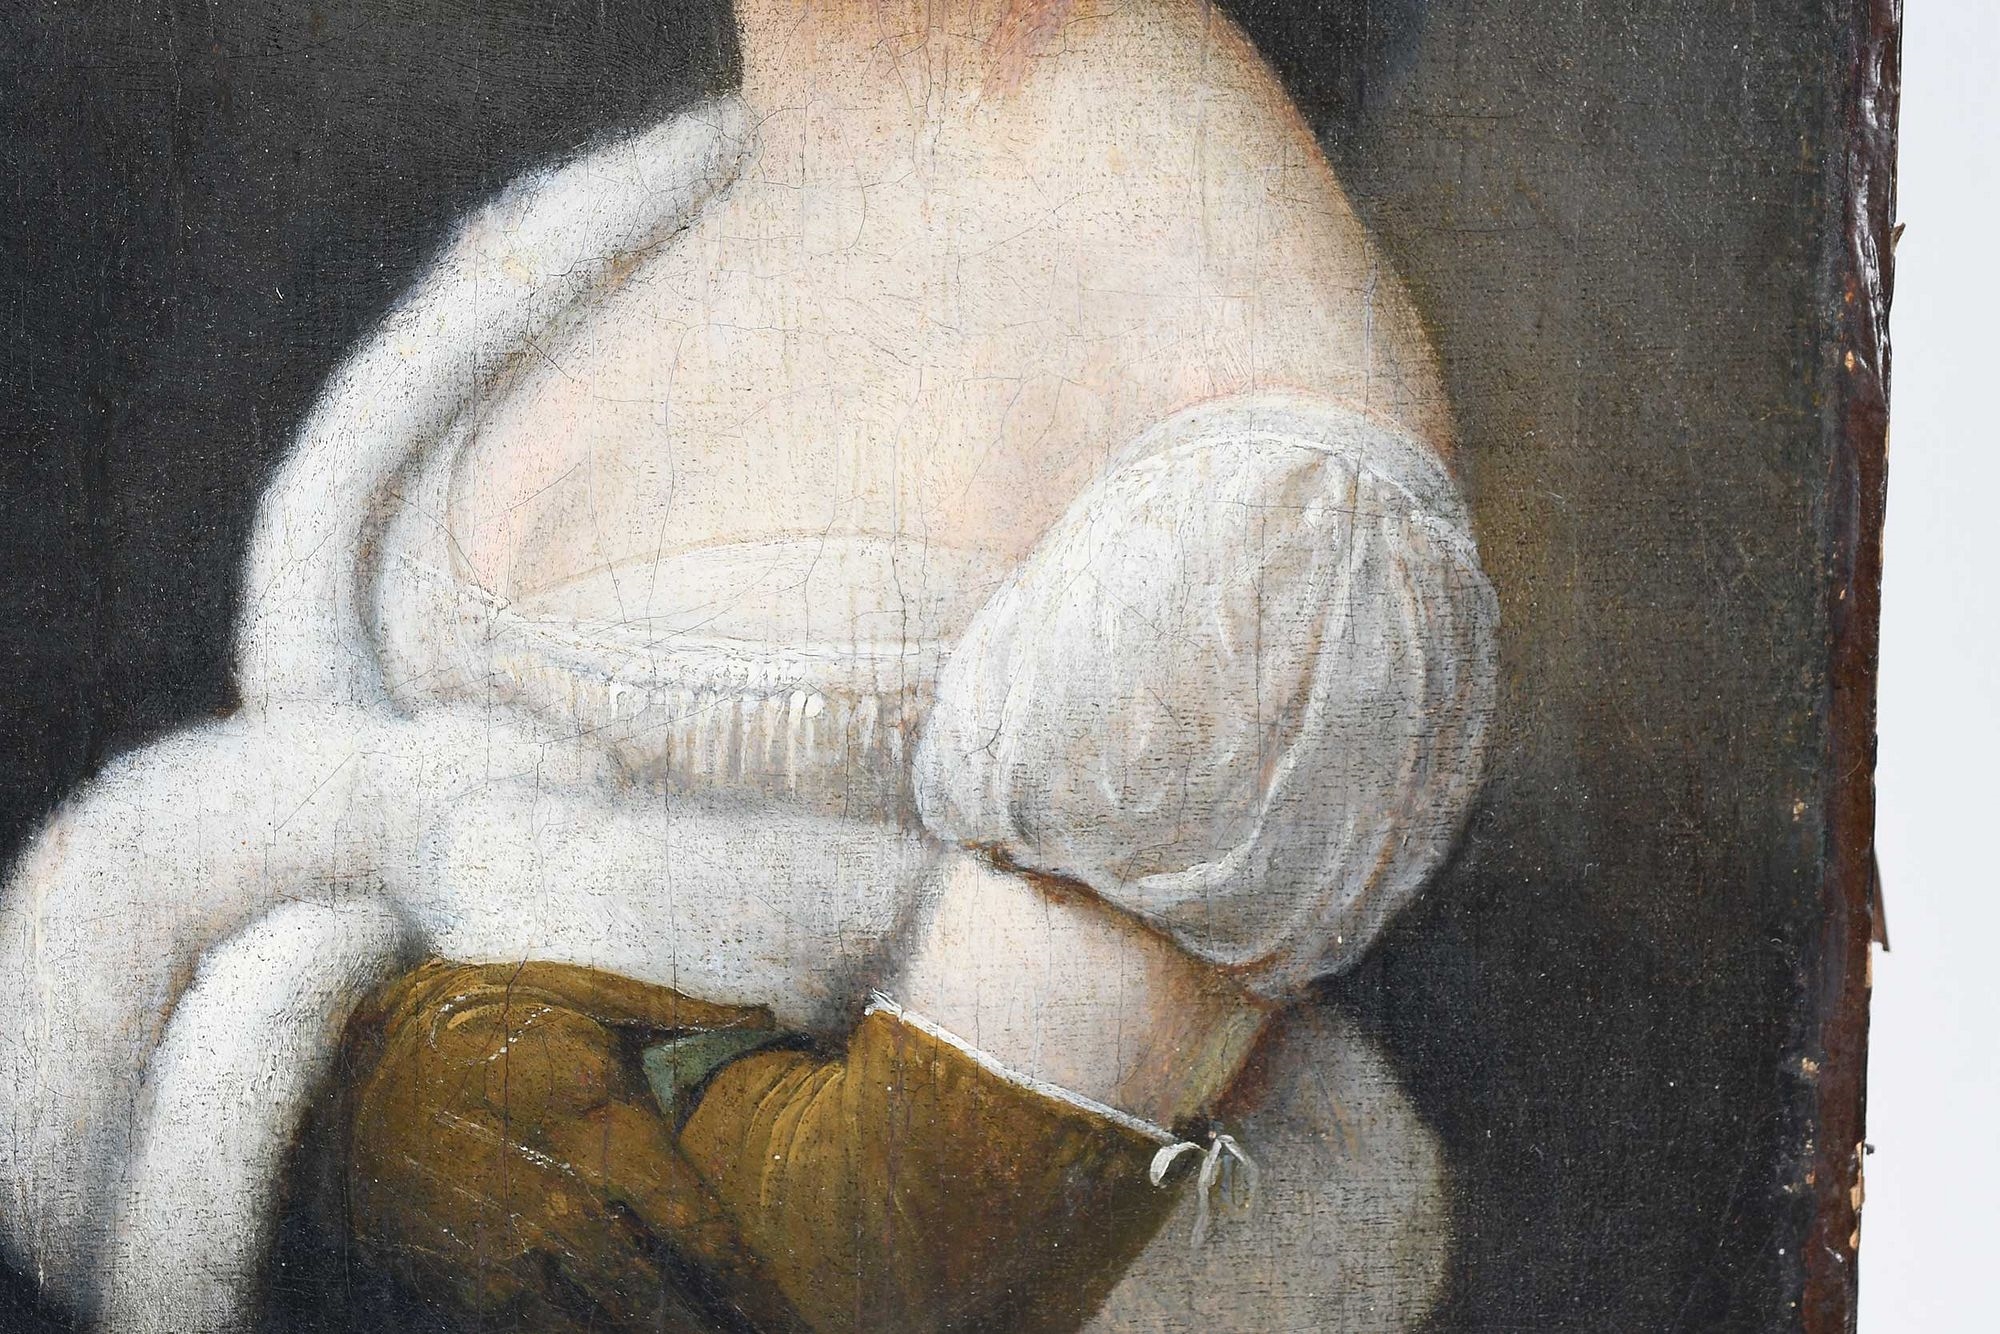 Artwork by Jean-Auguste-Dominique Ingres, Portrait of a Woman in a Fur Trimmed Wrap, Made of oil on canvas